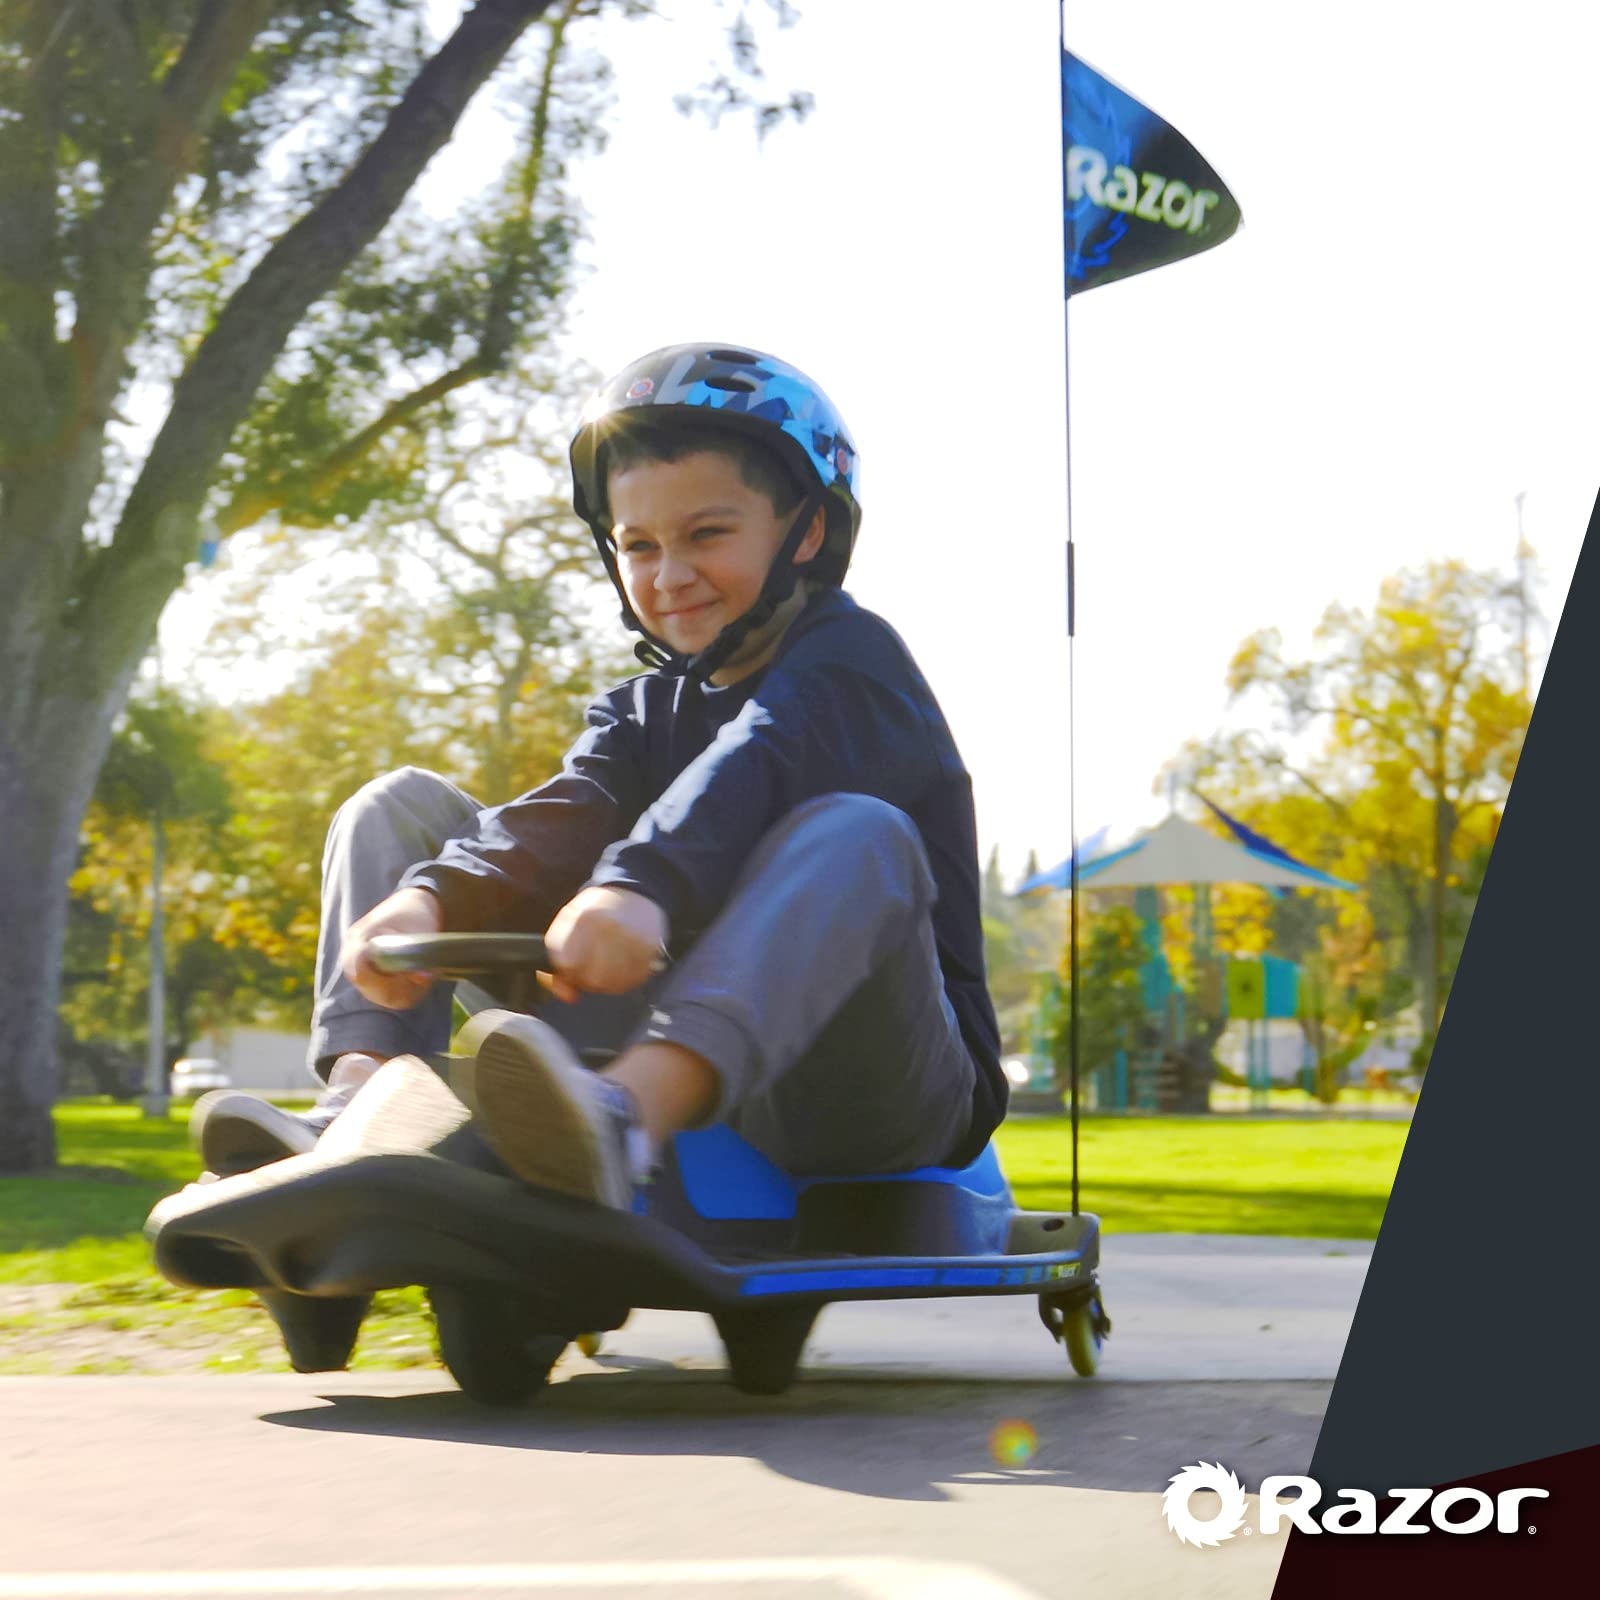 Razor Crazy Cart Shift for Kids Ages 6+ (Low Speed) 8+ (High Speed) - 12V Electric Drifting Go Kart for Kids - High/Low Speed Switch and Simplified Drifting System, for Riders up to 120 lbs,Black/Blue